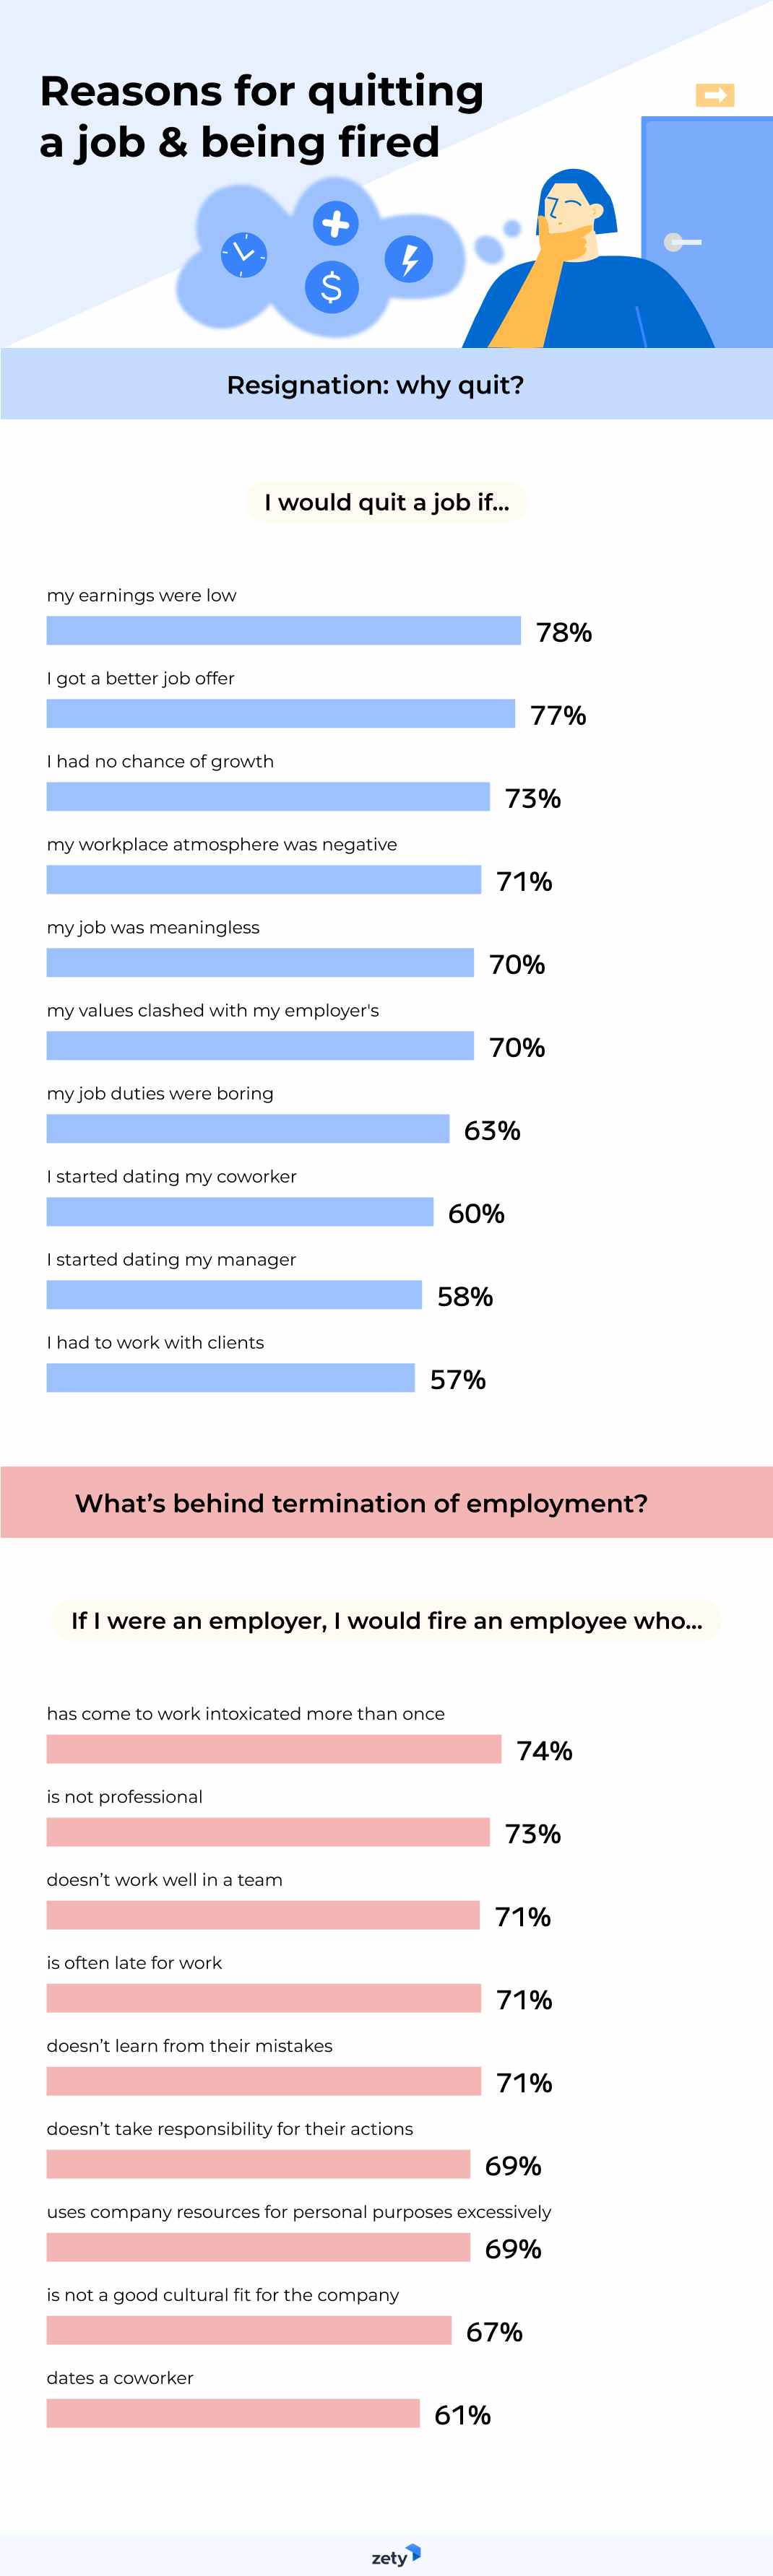 Reasons for quitting a job and getting fired